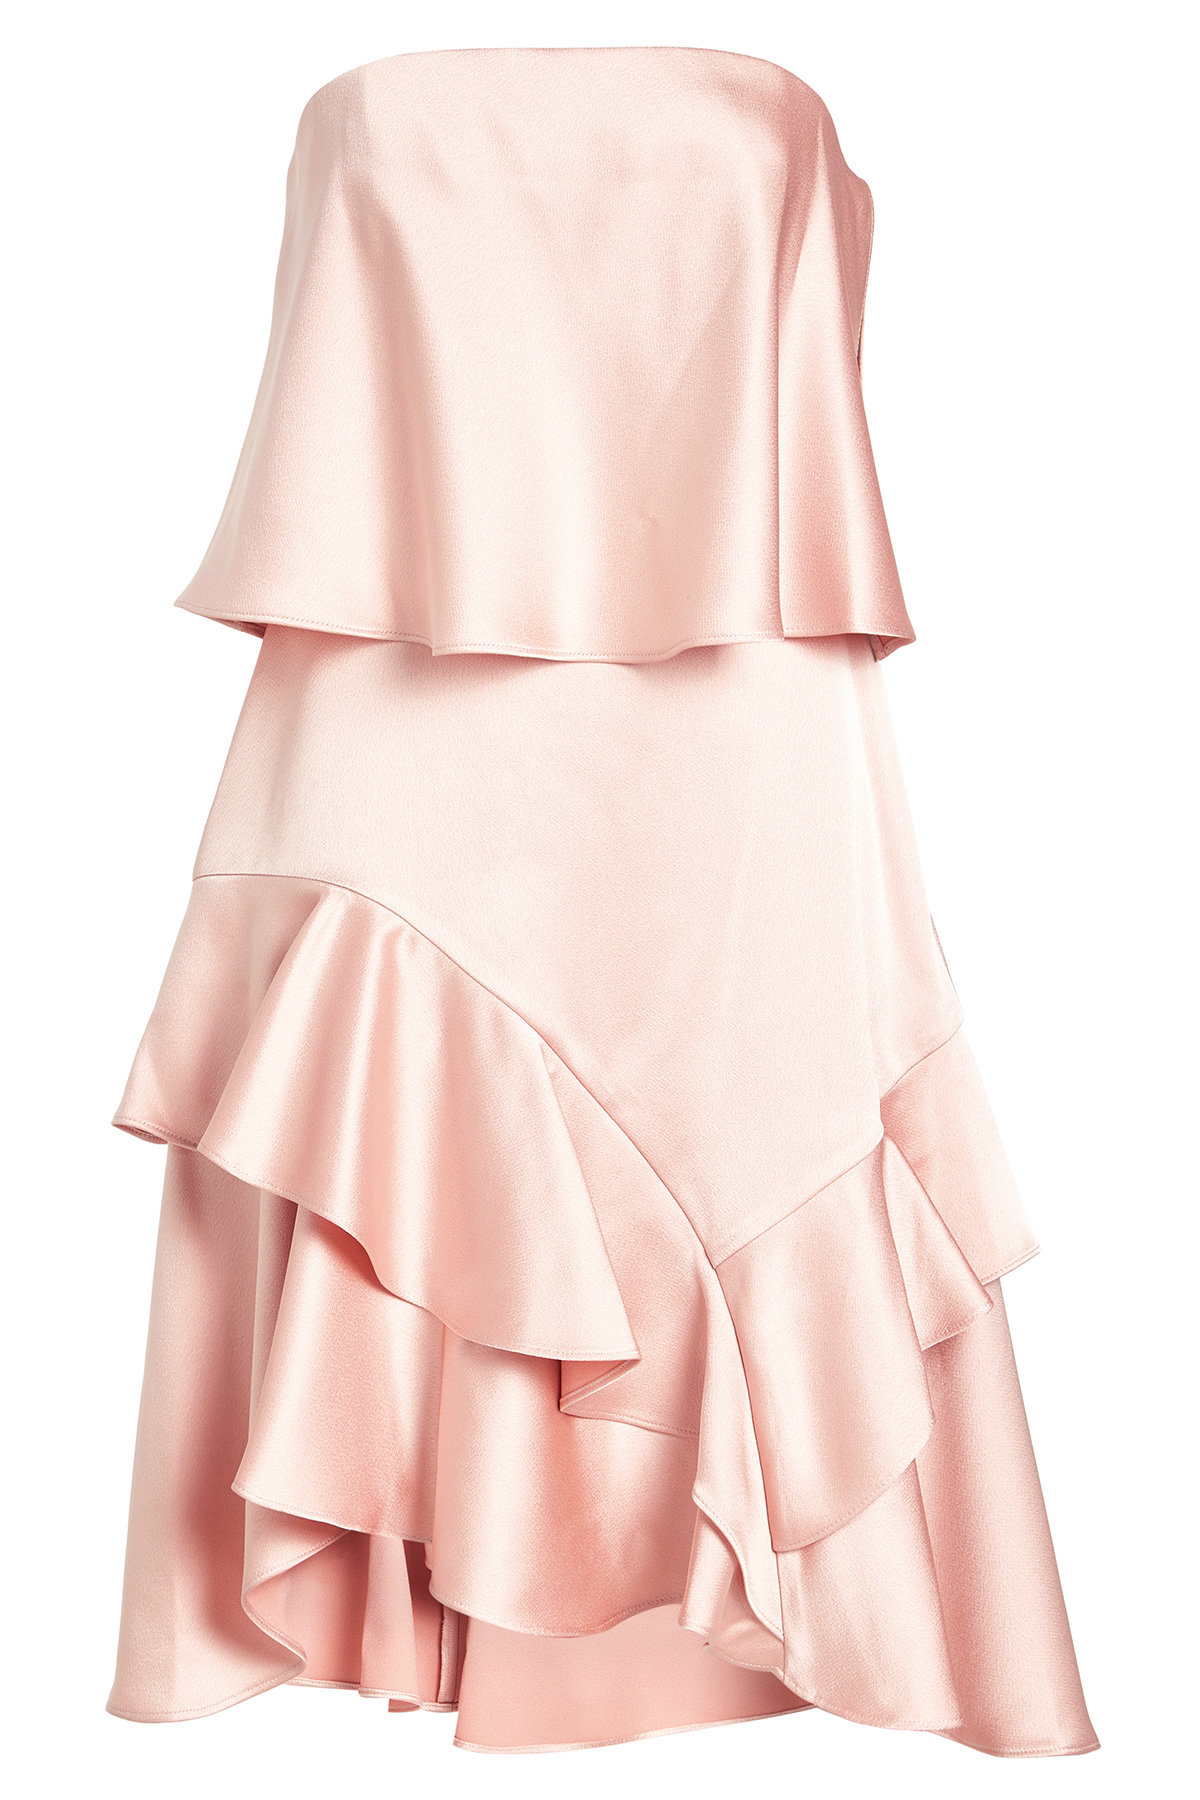 Strapless Satin Dress with Ruffles by Halston Heritage